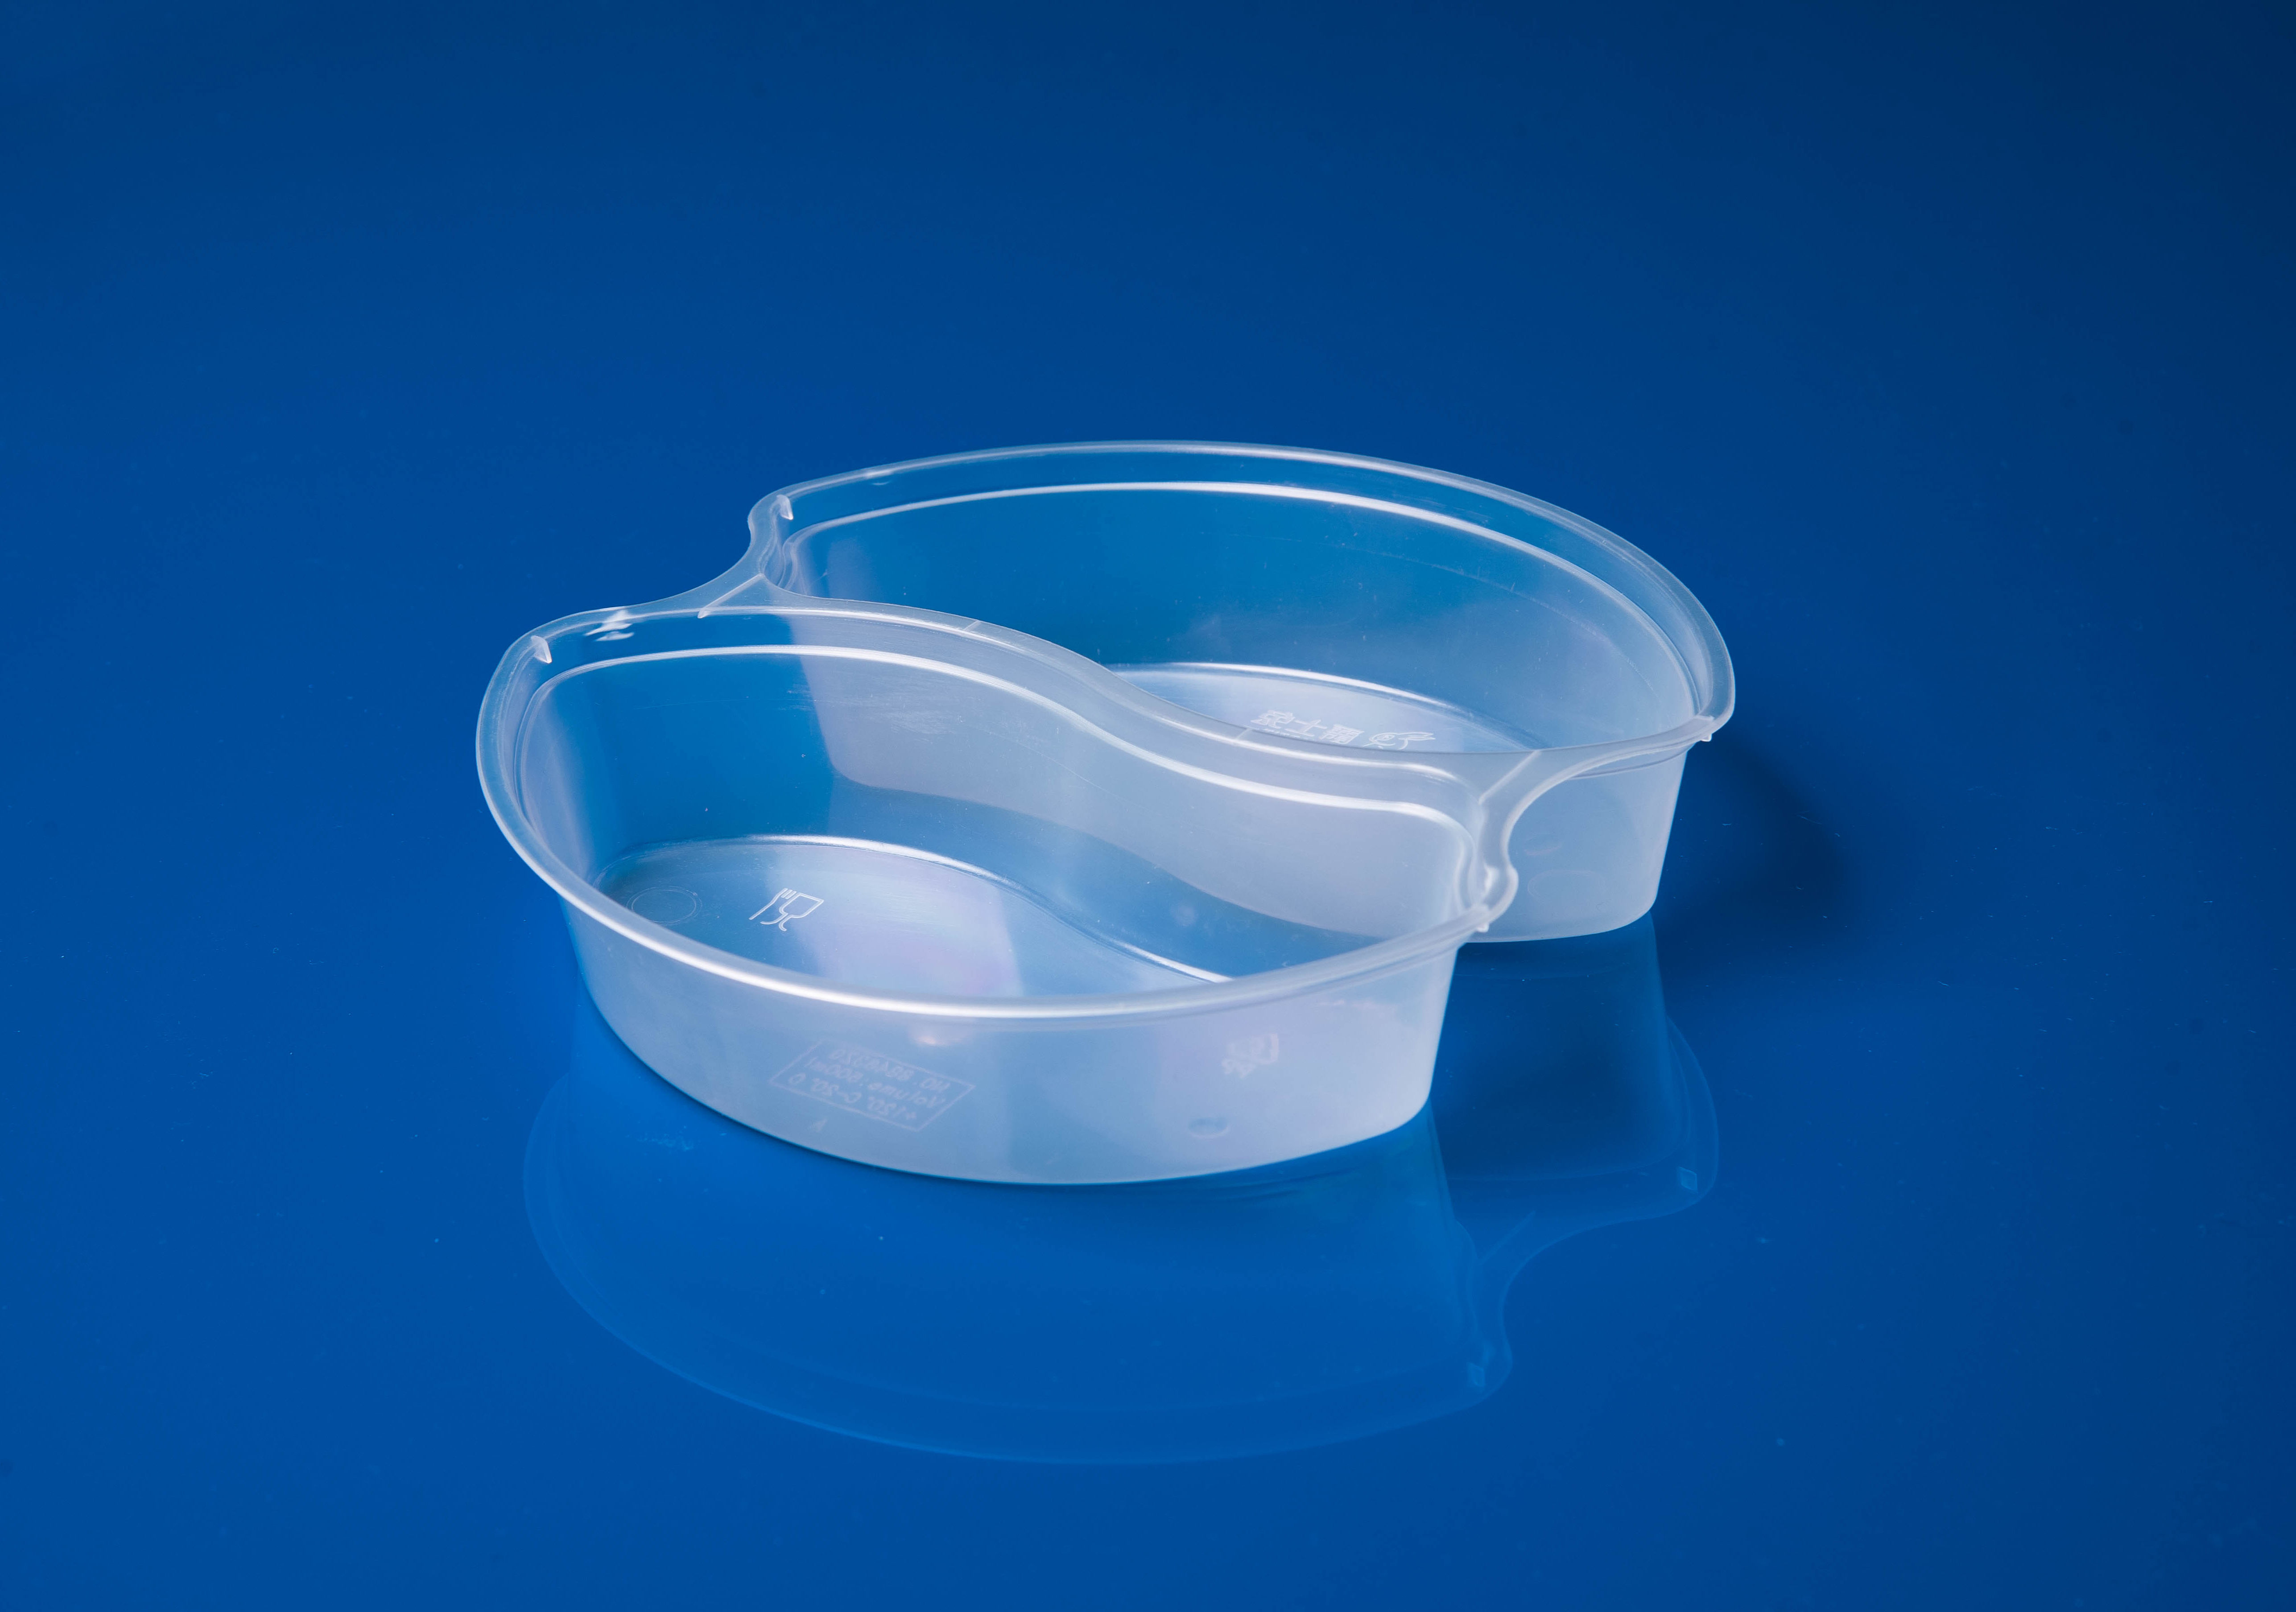 Removable tray